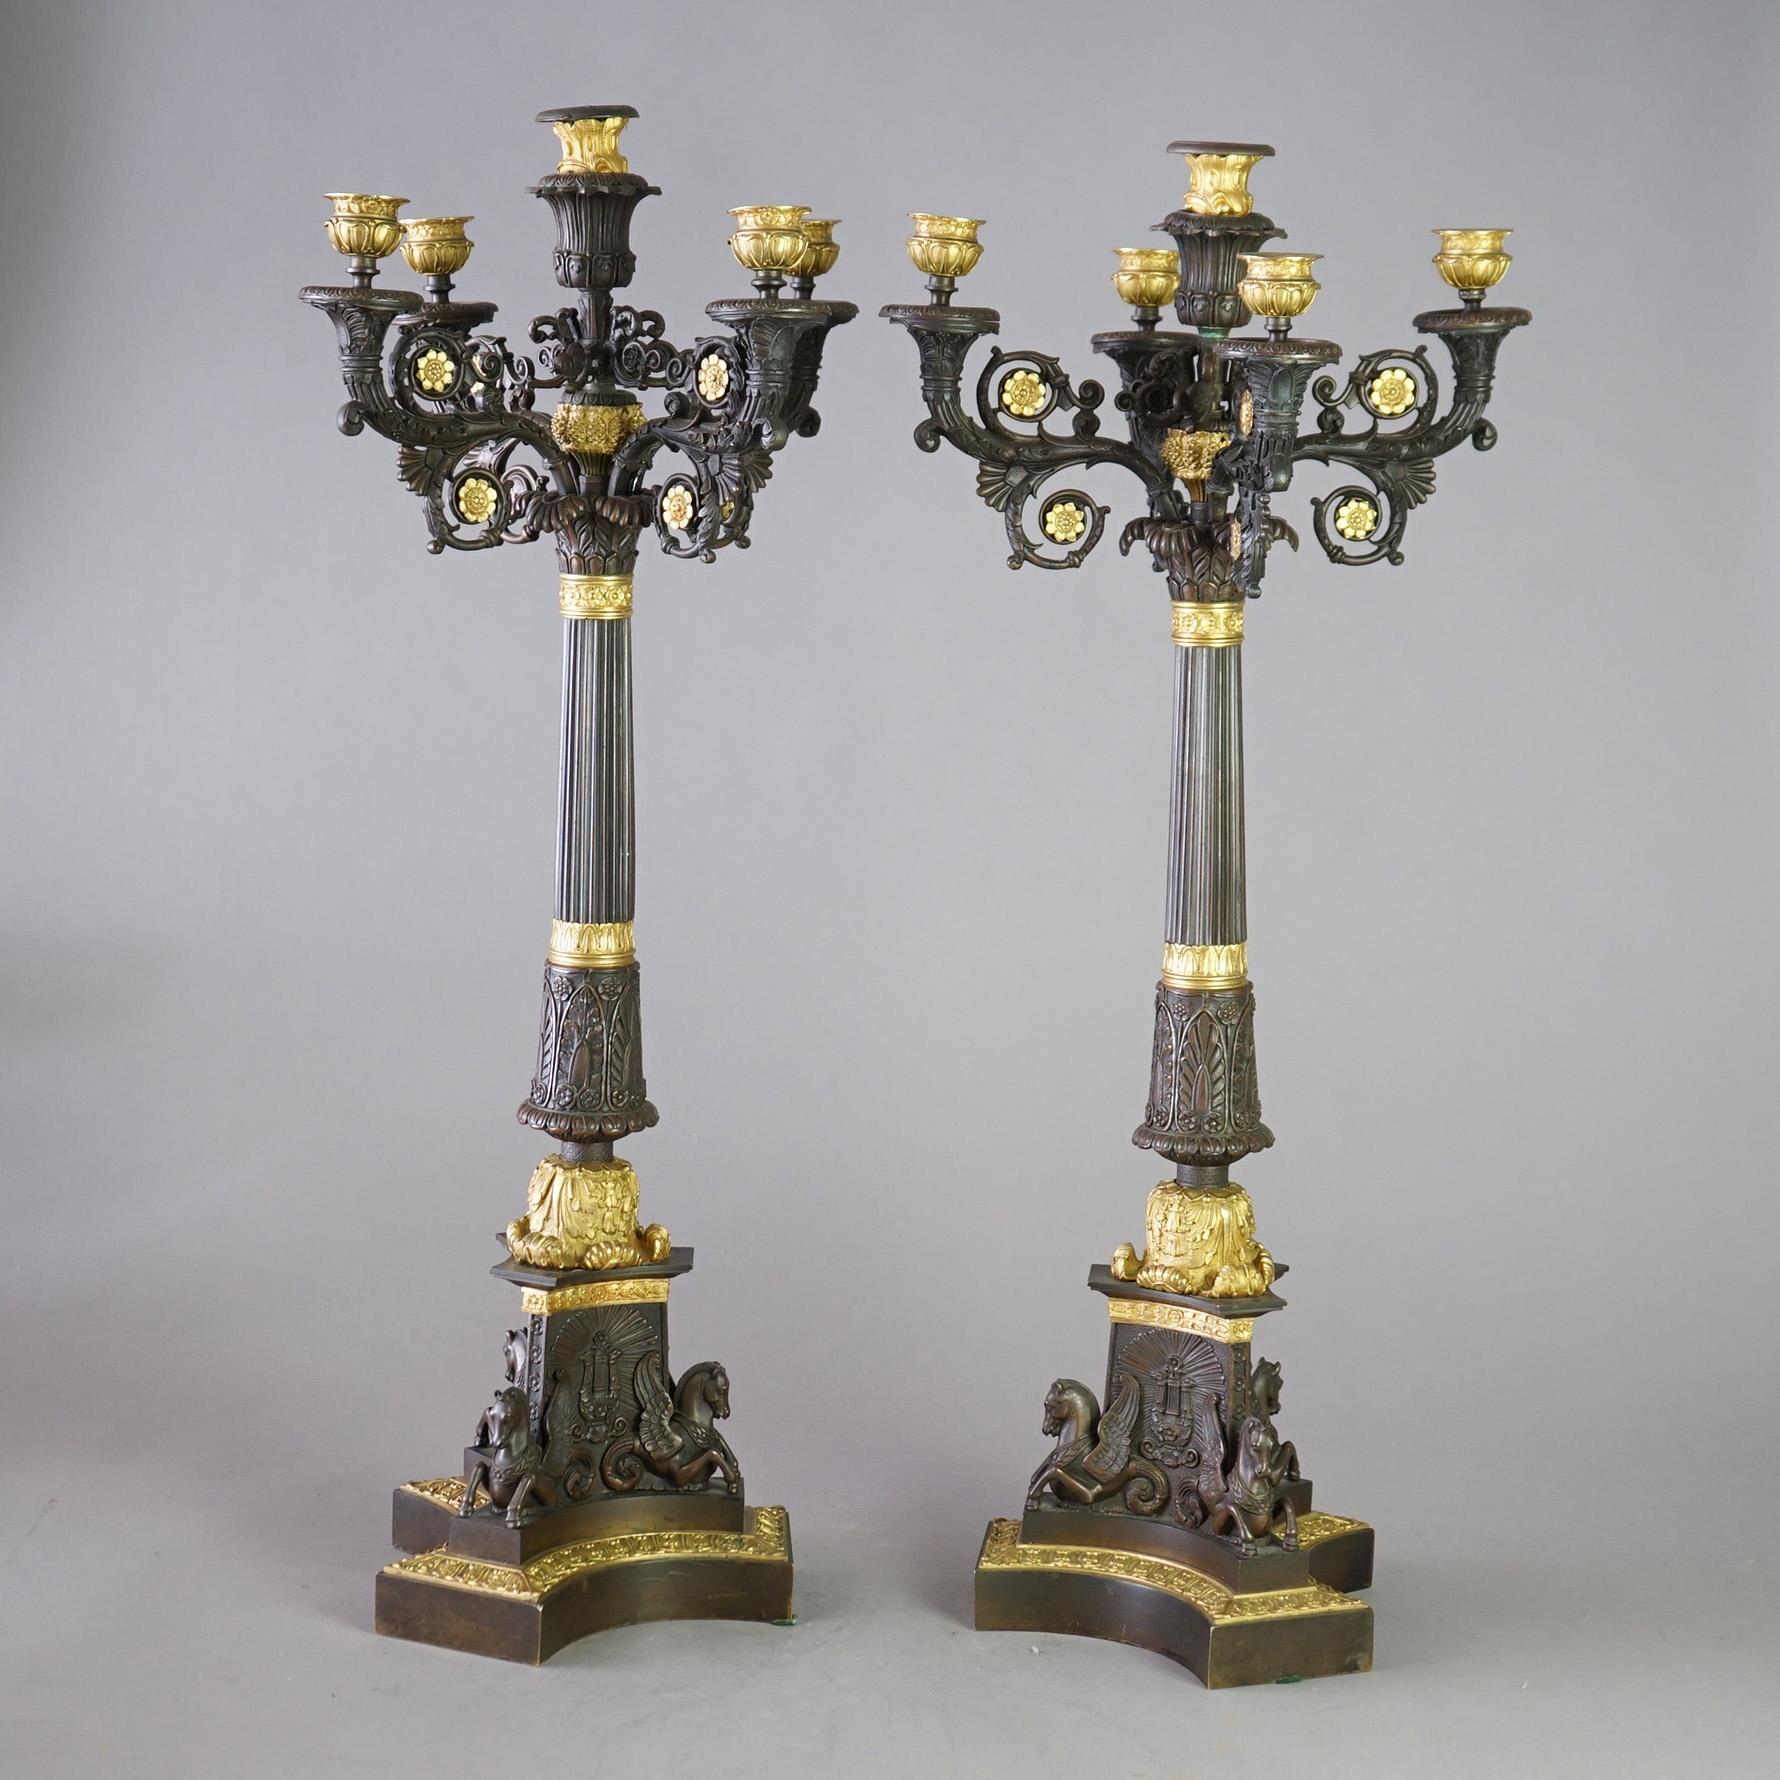 An antique pair of oversized French Empire figural candelabra offer cast bronze construction with scroll form arms with gilt rosettes and terminating in gilt candle sockets over flared and fluted column, raised on Pegasus base; gilt elements